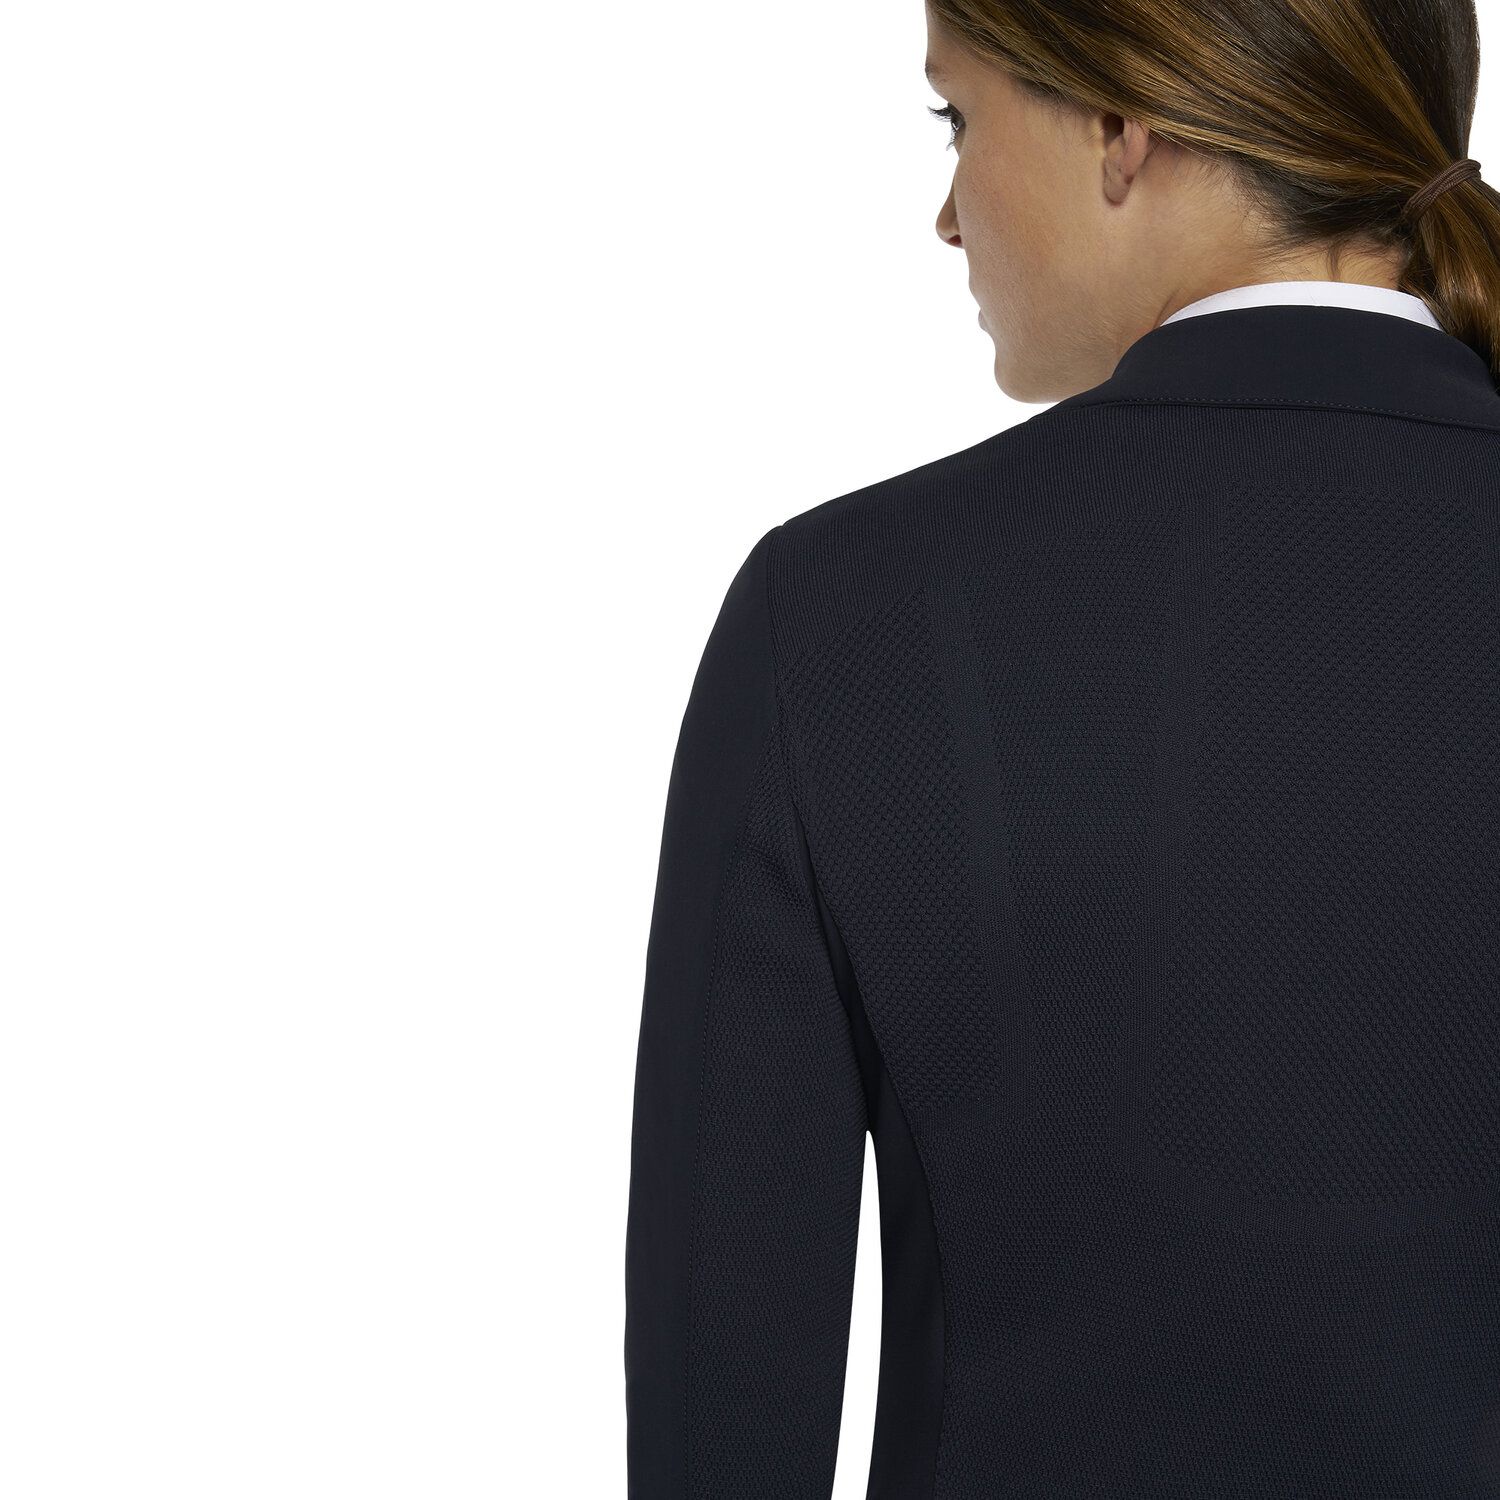 product shot image of the Ladies R-Evo Light Tech Knit Zip Riding Jacket - Navy